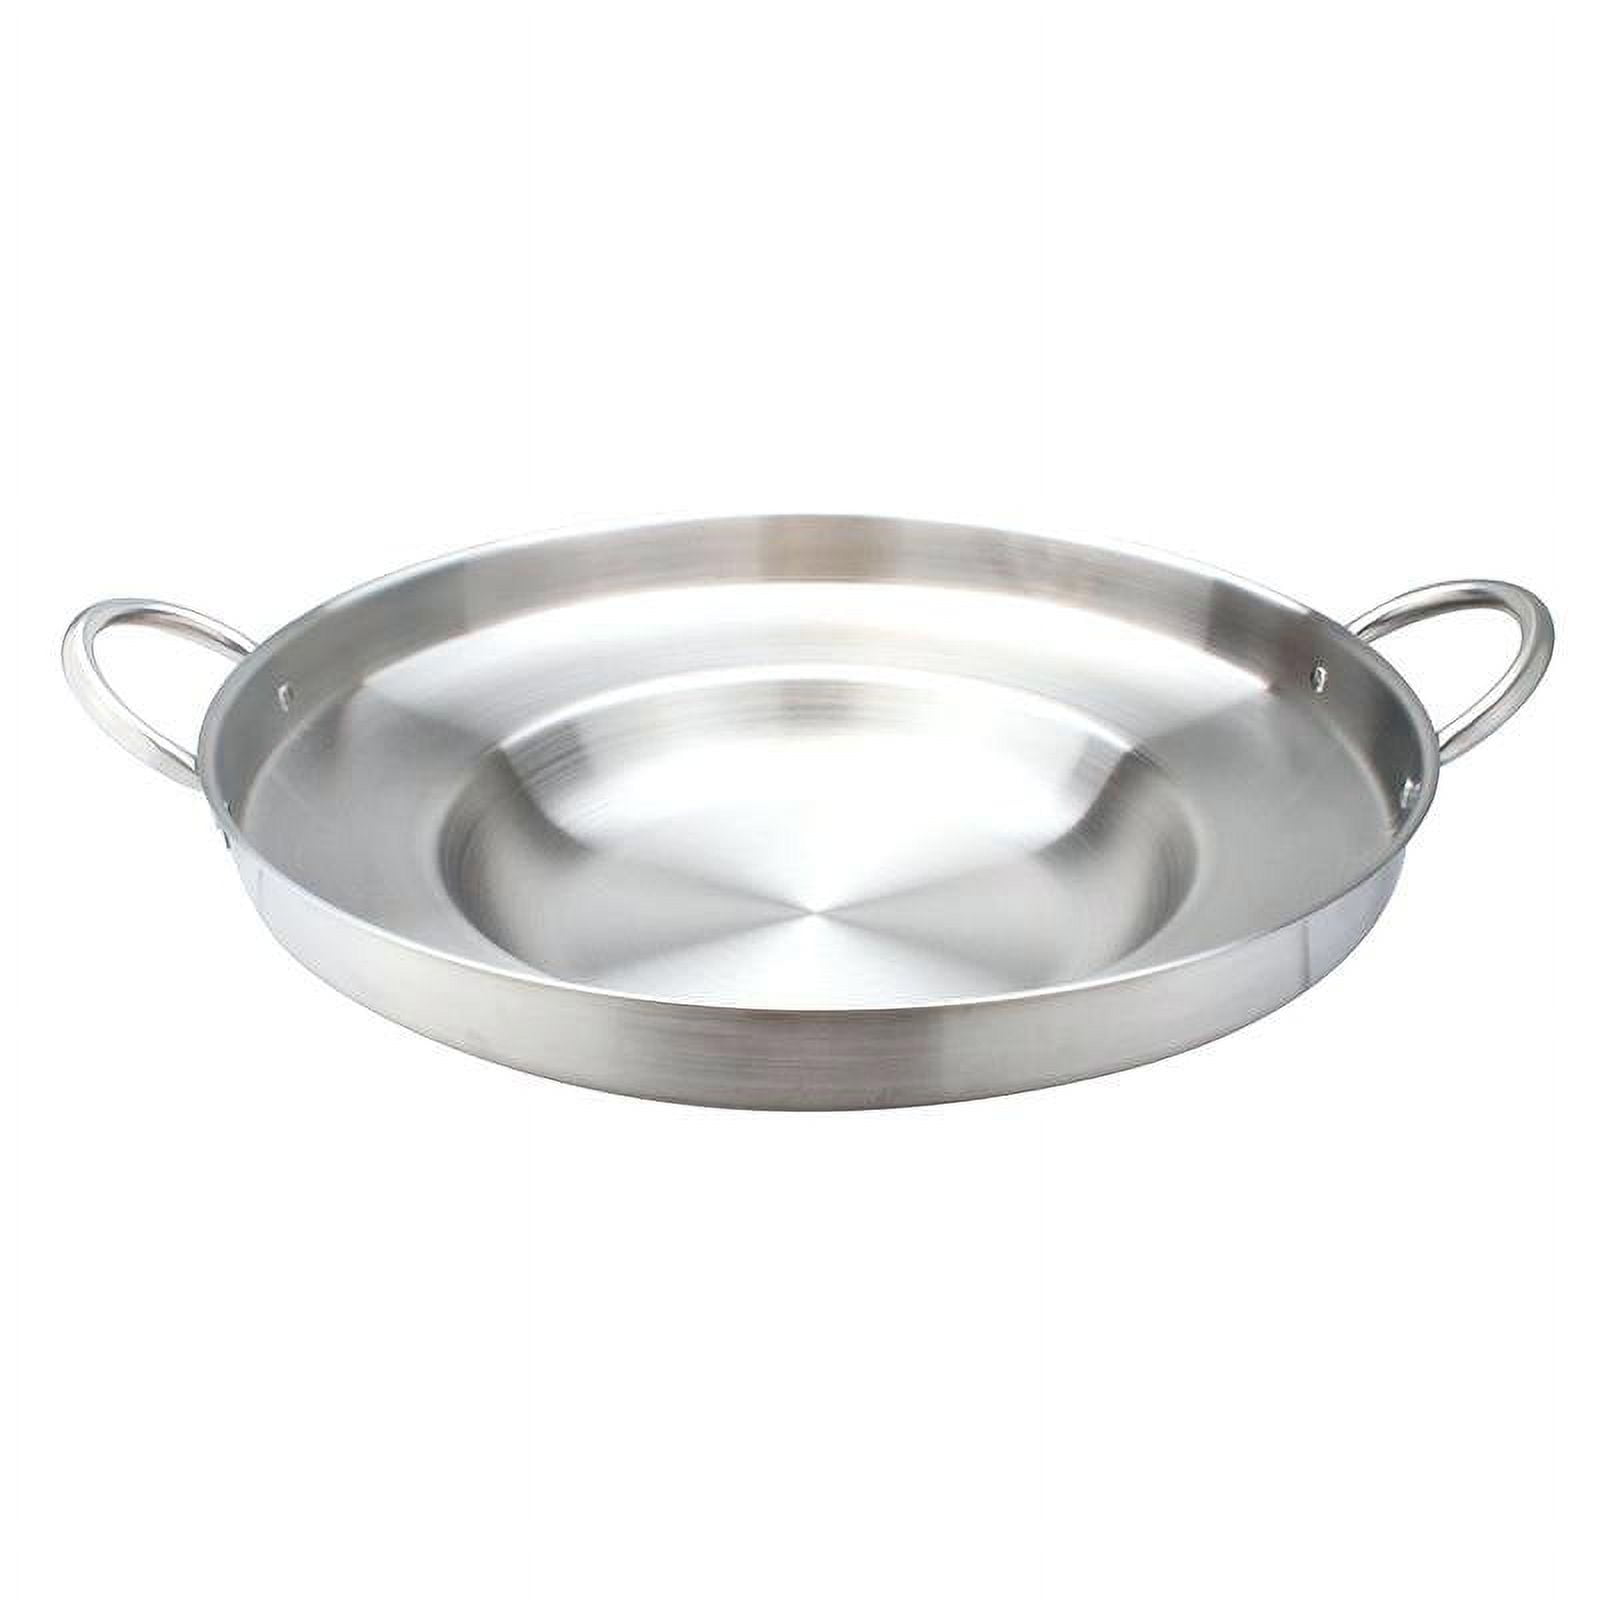 Infuse Carbon Steel 15.75X7.75 Non-Stick Comal Pan